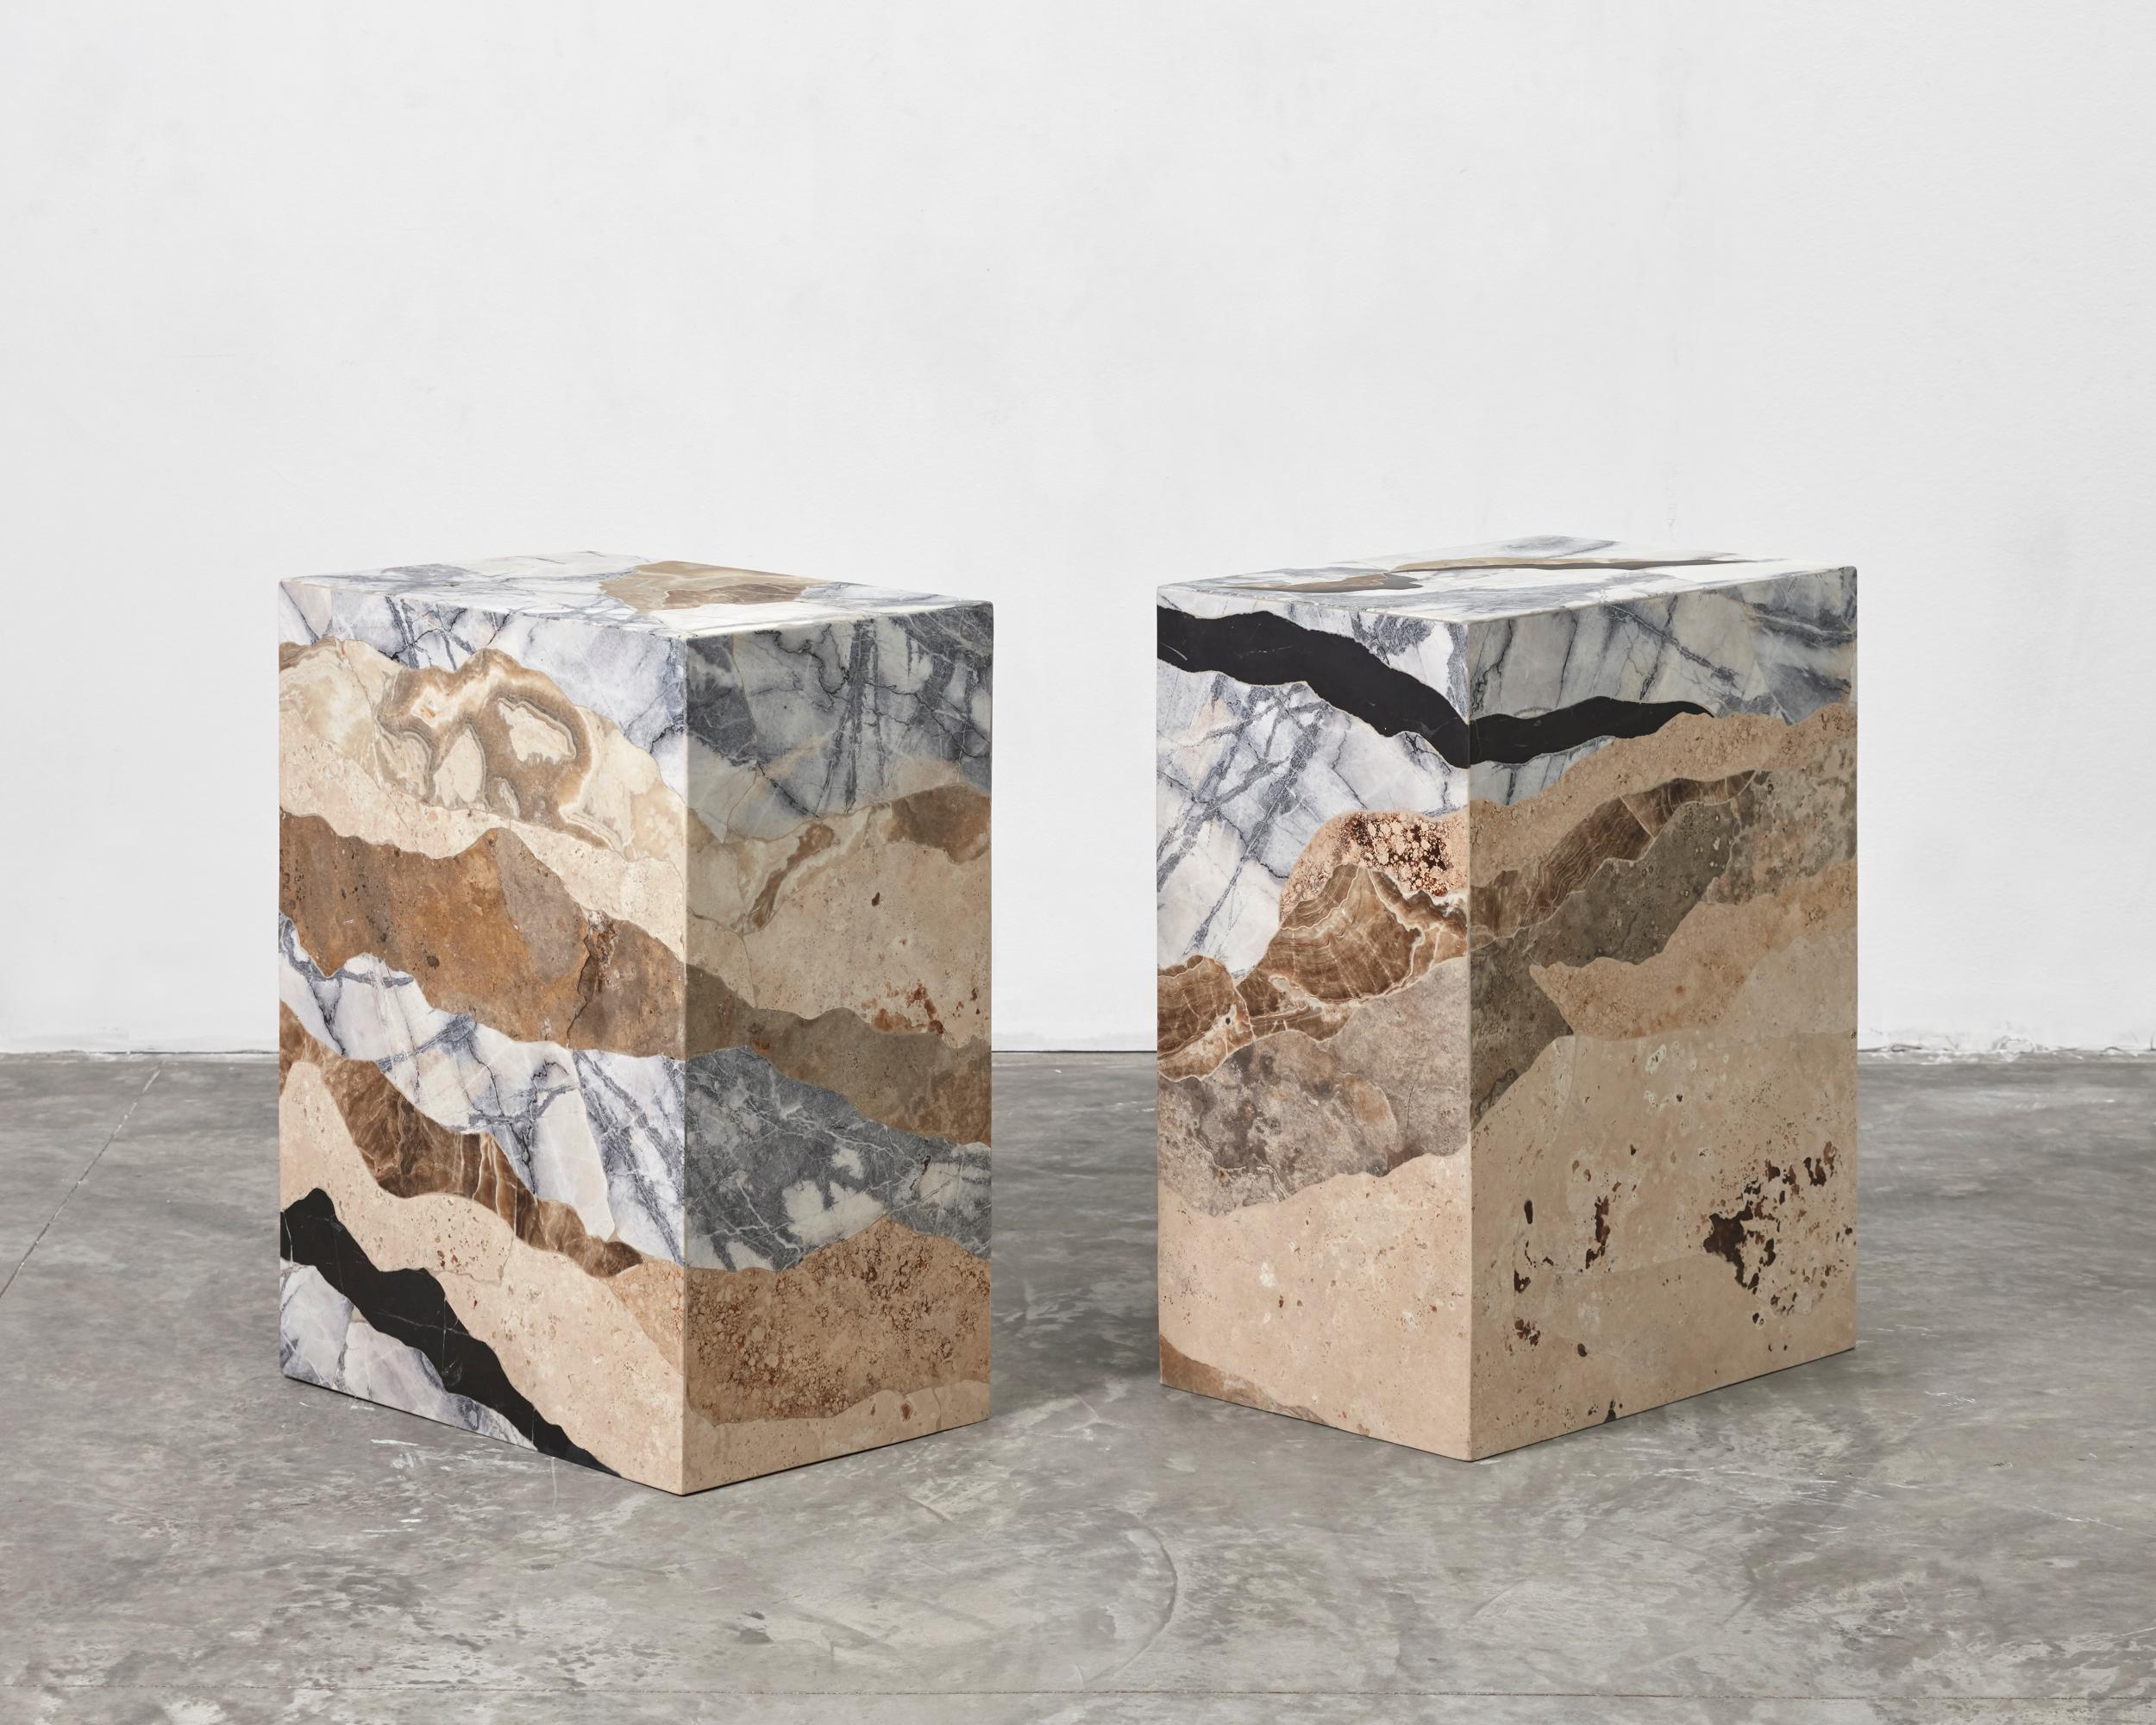 Strata N°1 by Estudio Rafael Freyre
Dimensions: W 48 x D 40 x H 80 cm
Materials: Diverse recycled Andes stones

Strata is a series of pieces developed from observing the complex processes of soil composition. Gravity and the internal forces of